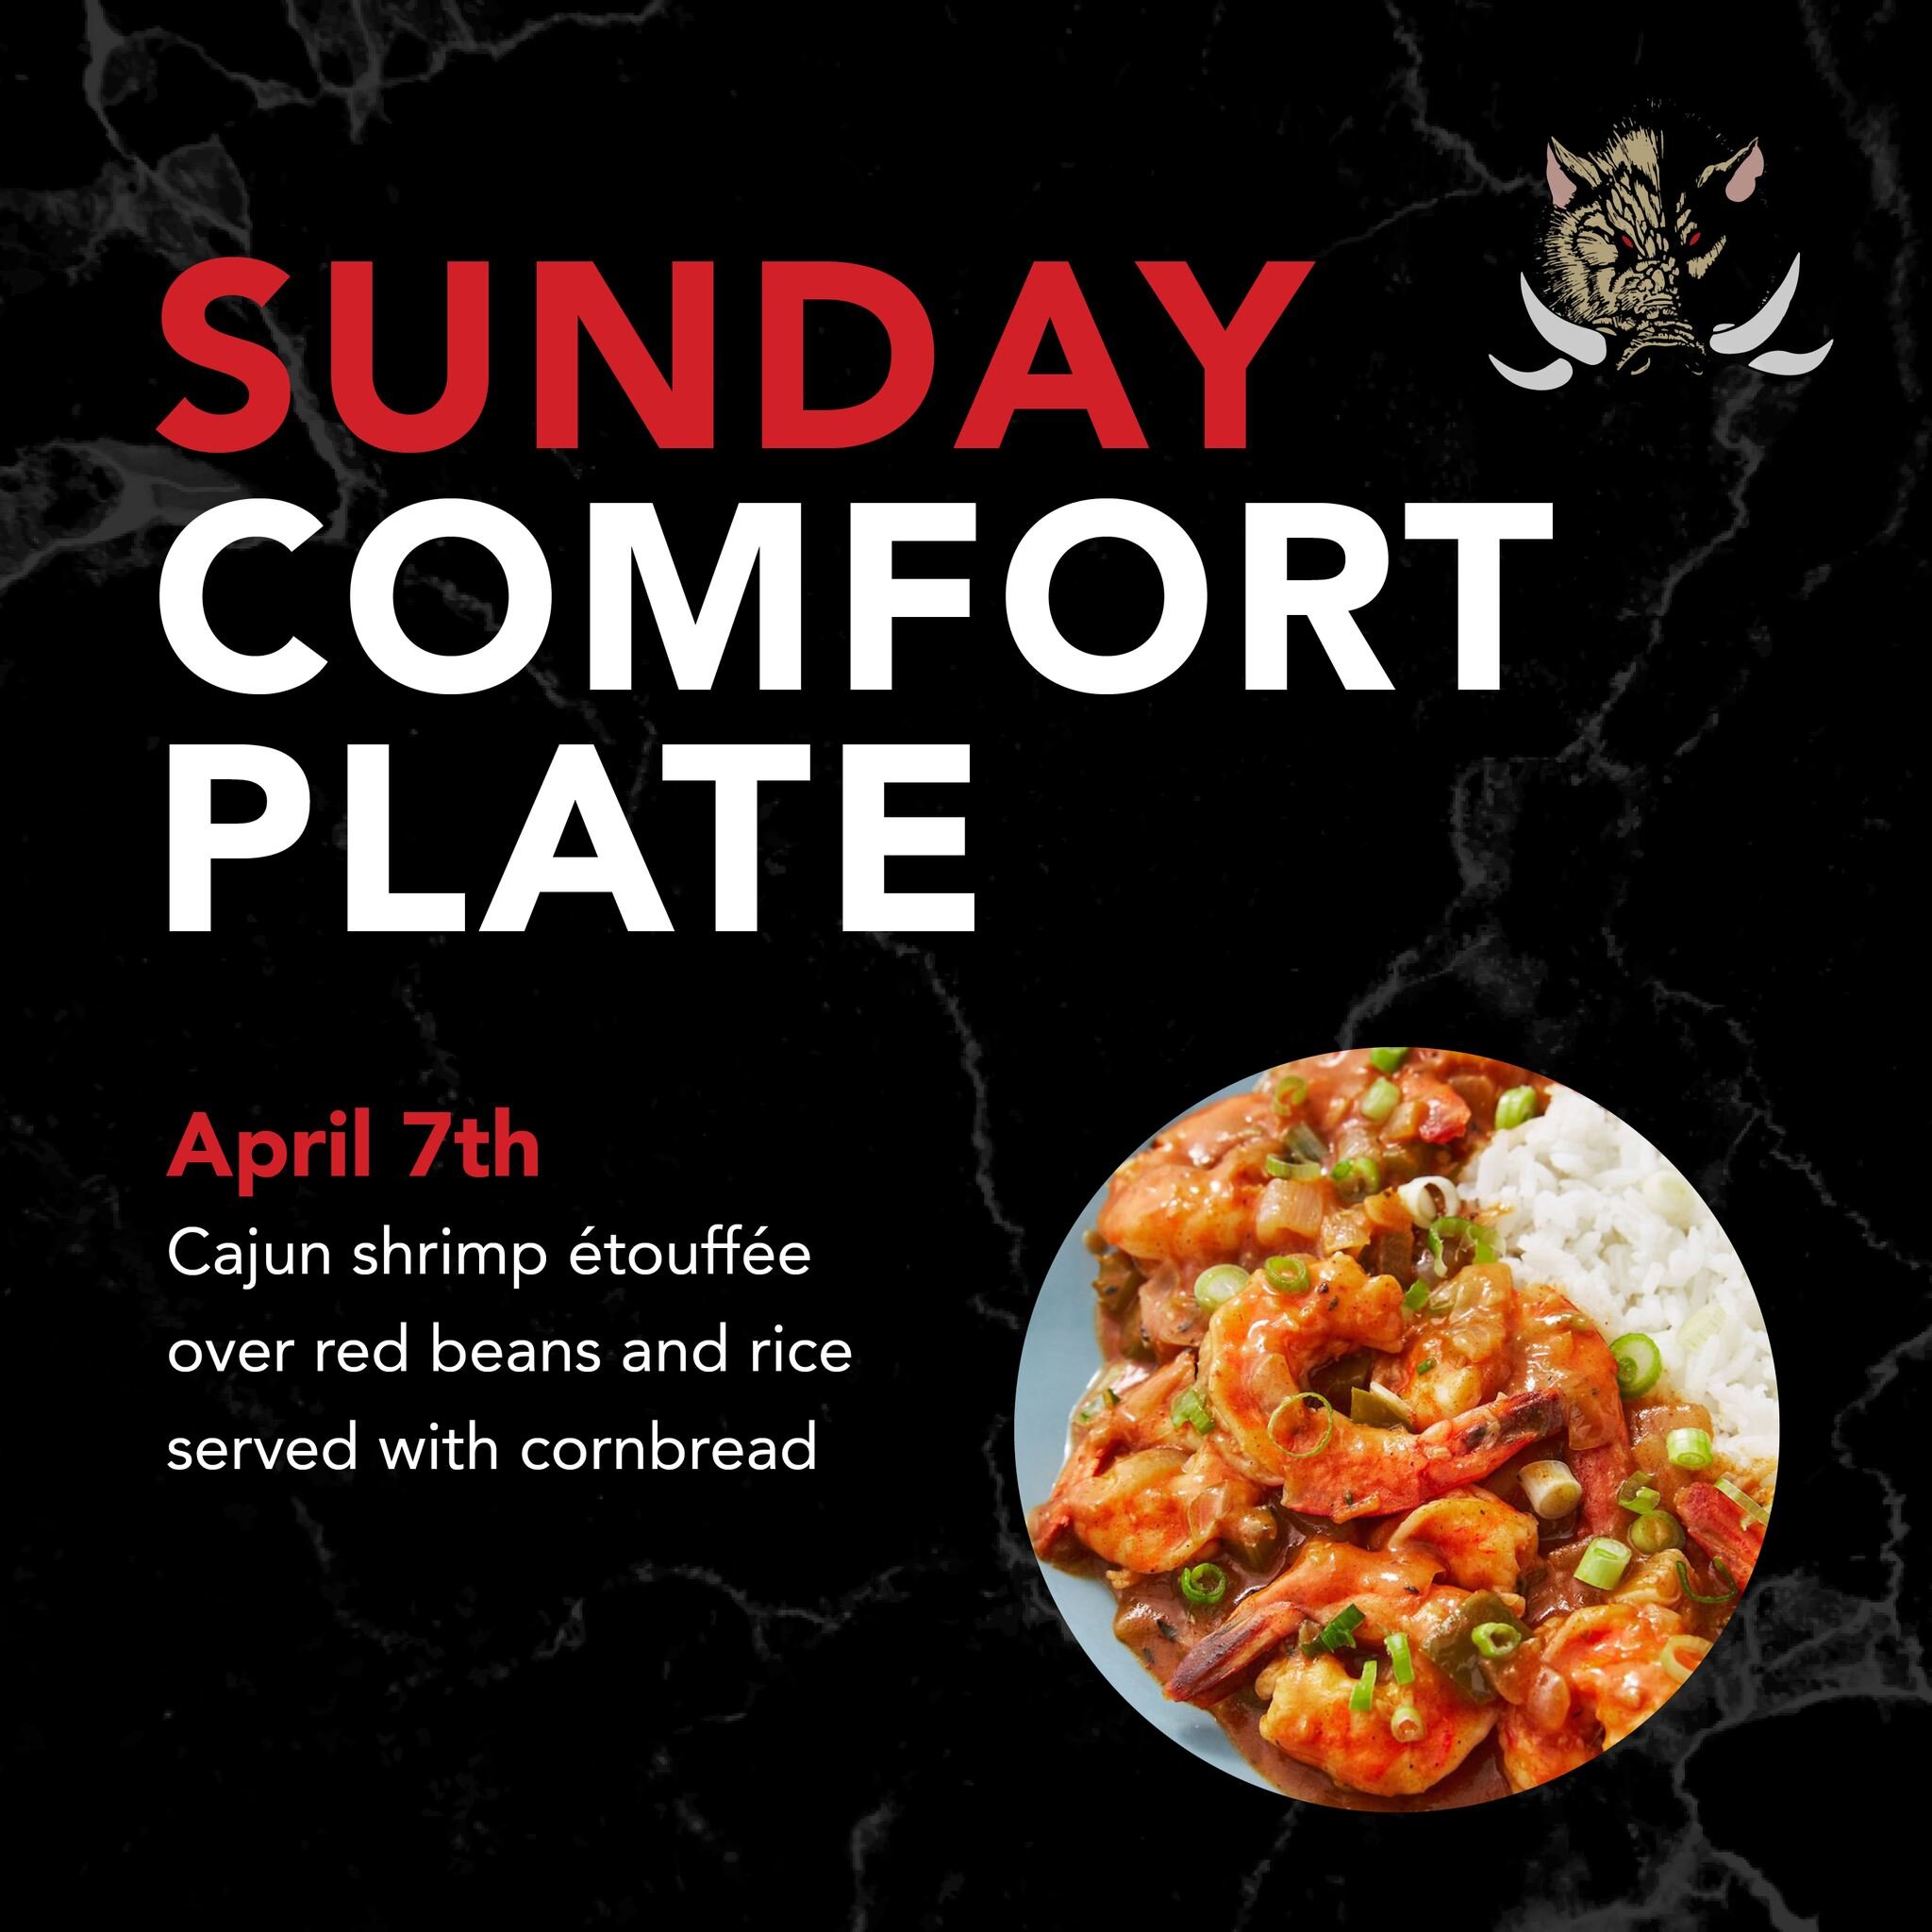 Craving some Cajun flavor? Don't miss our Cajun shrimp &eacute;touff&eacute;e Sunday Comfort Special on April 7th! It's the perfect way to spice up your Sunday.

#madboarnc #exit385 #tastethemadness #sundaycomfortspecial #cajunshrimp